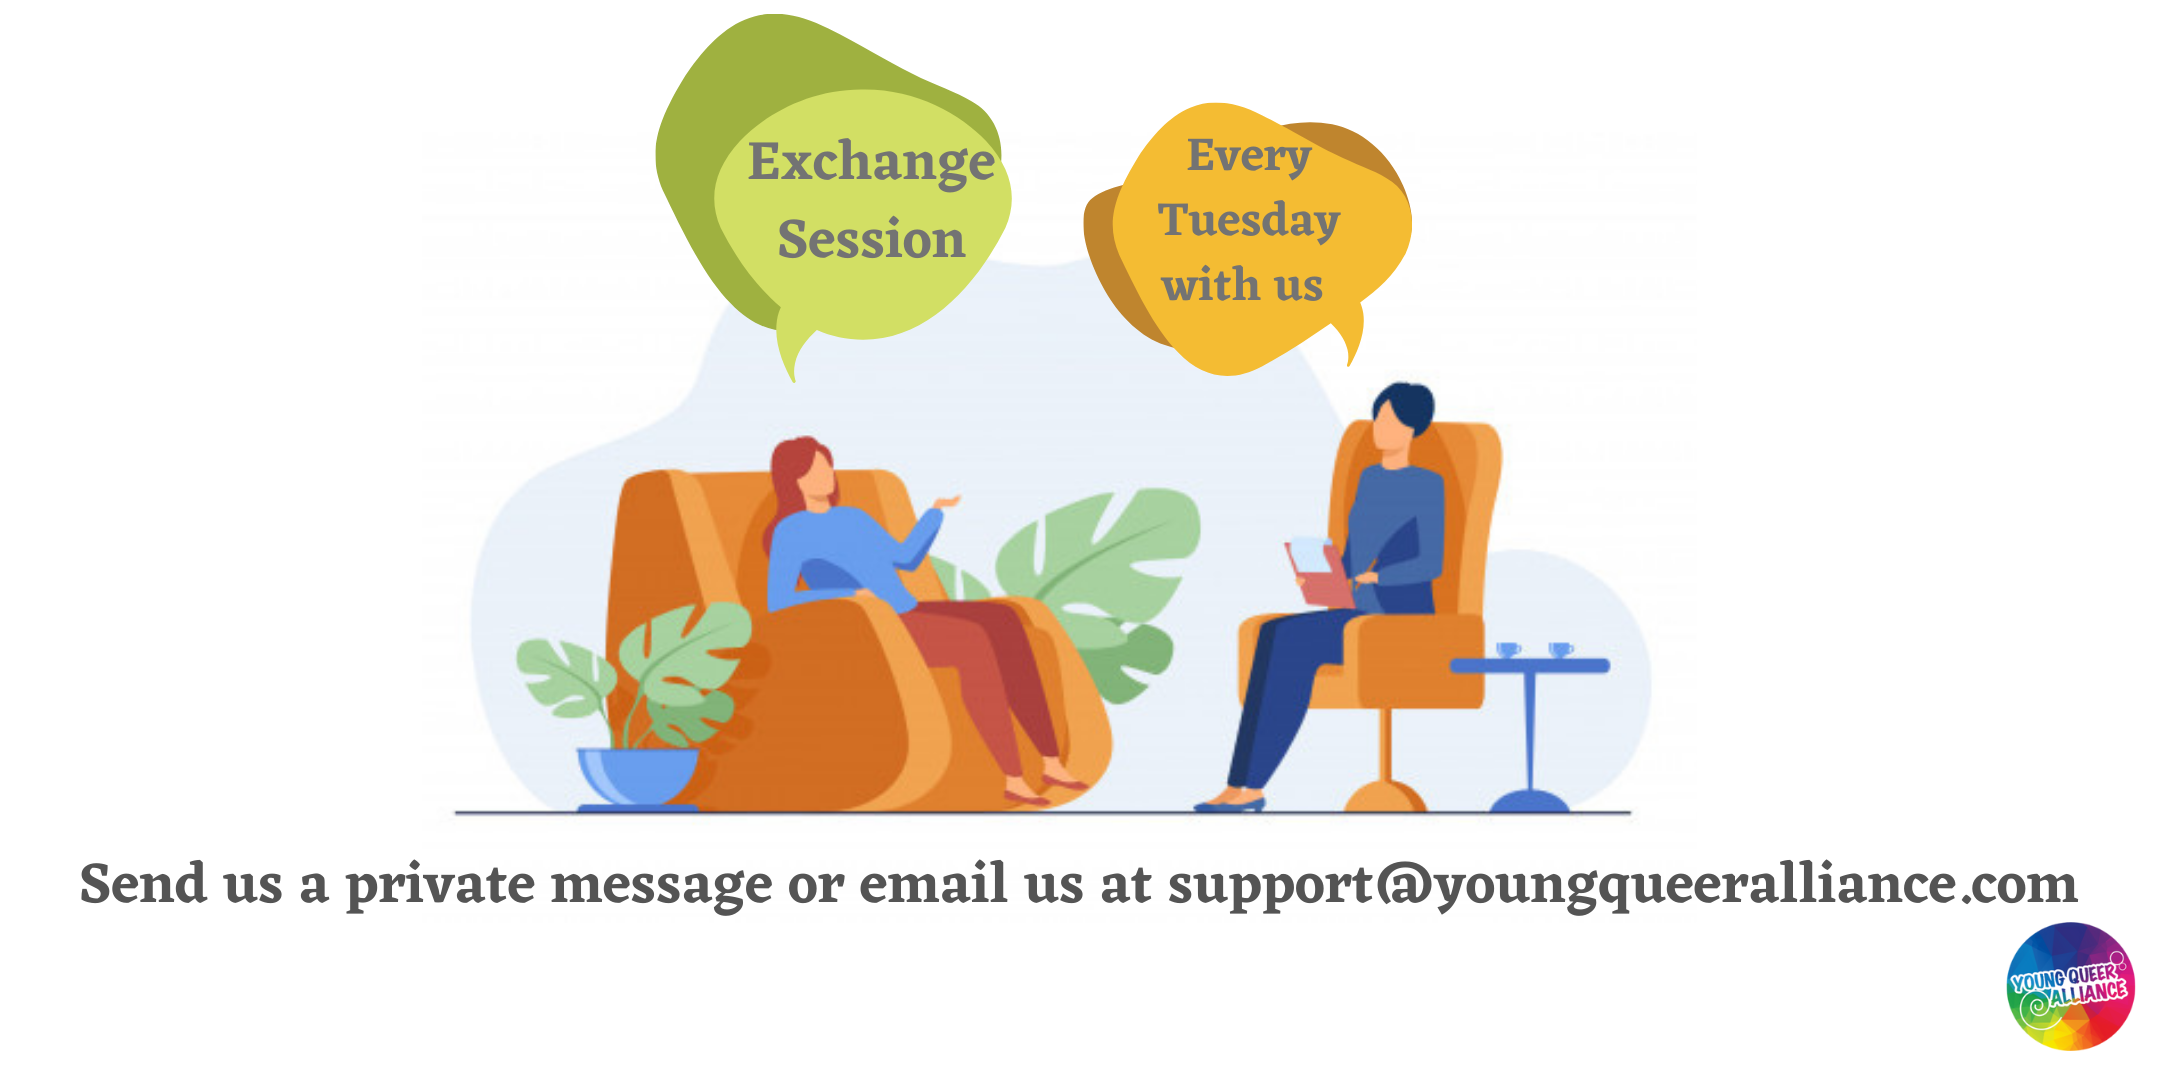 Mental Health Talk - Private Session every Tuesday